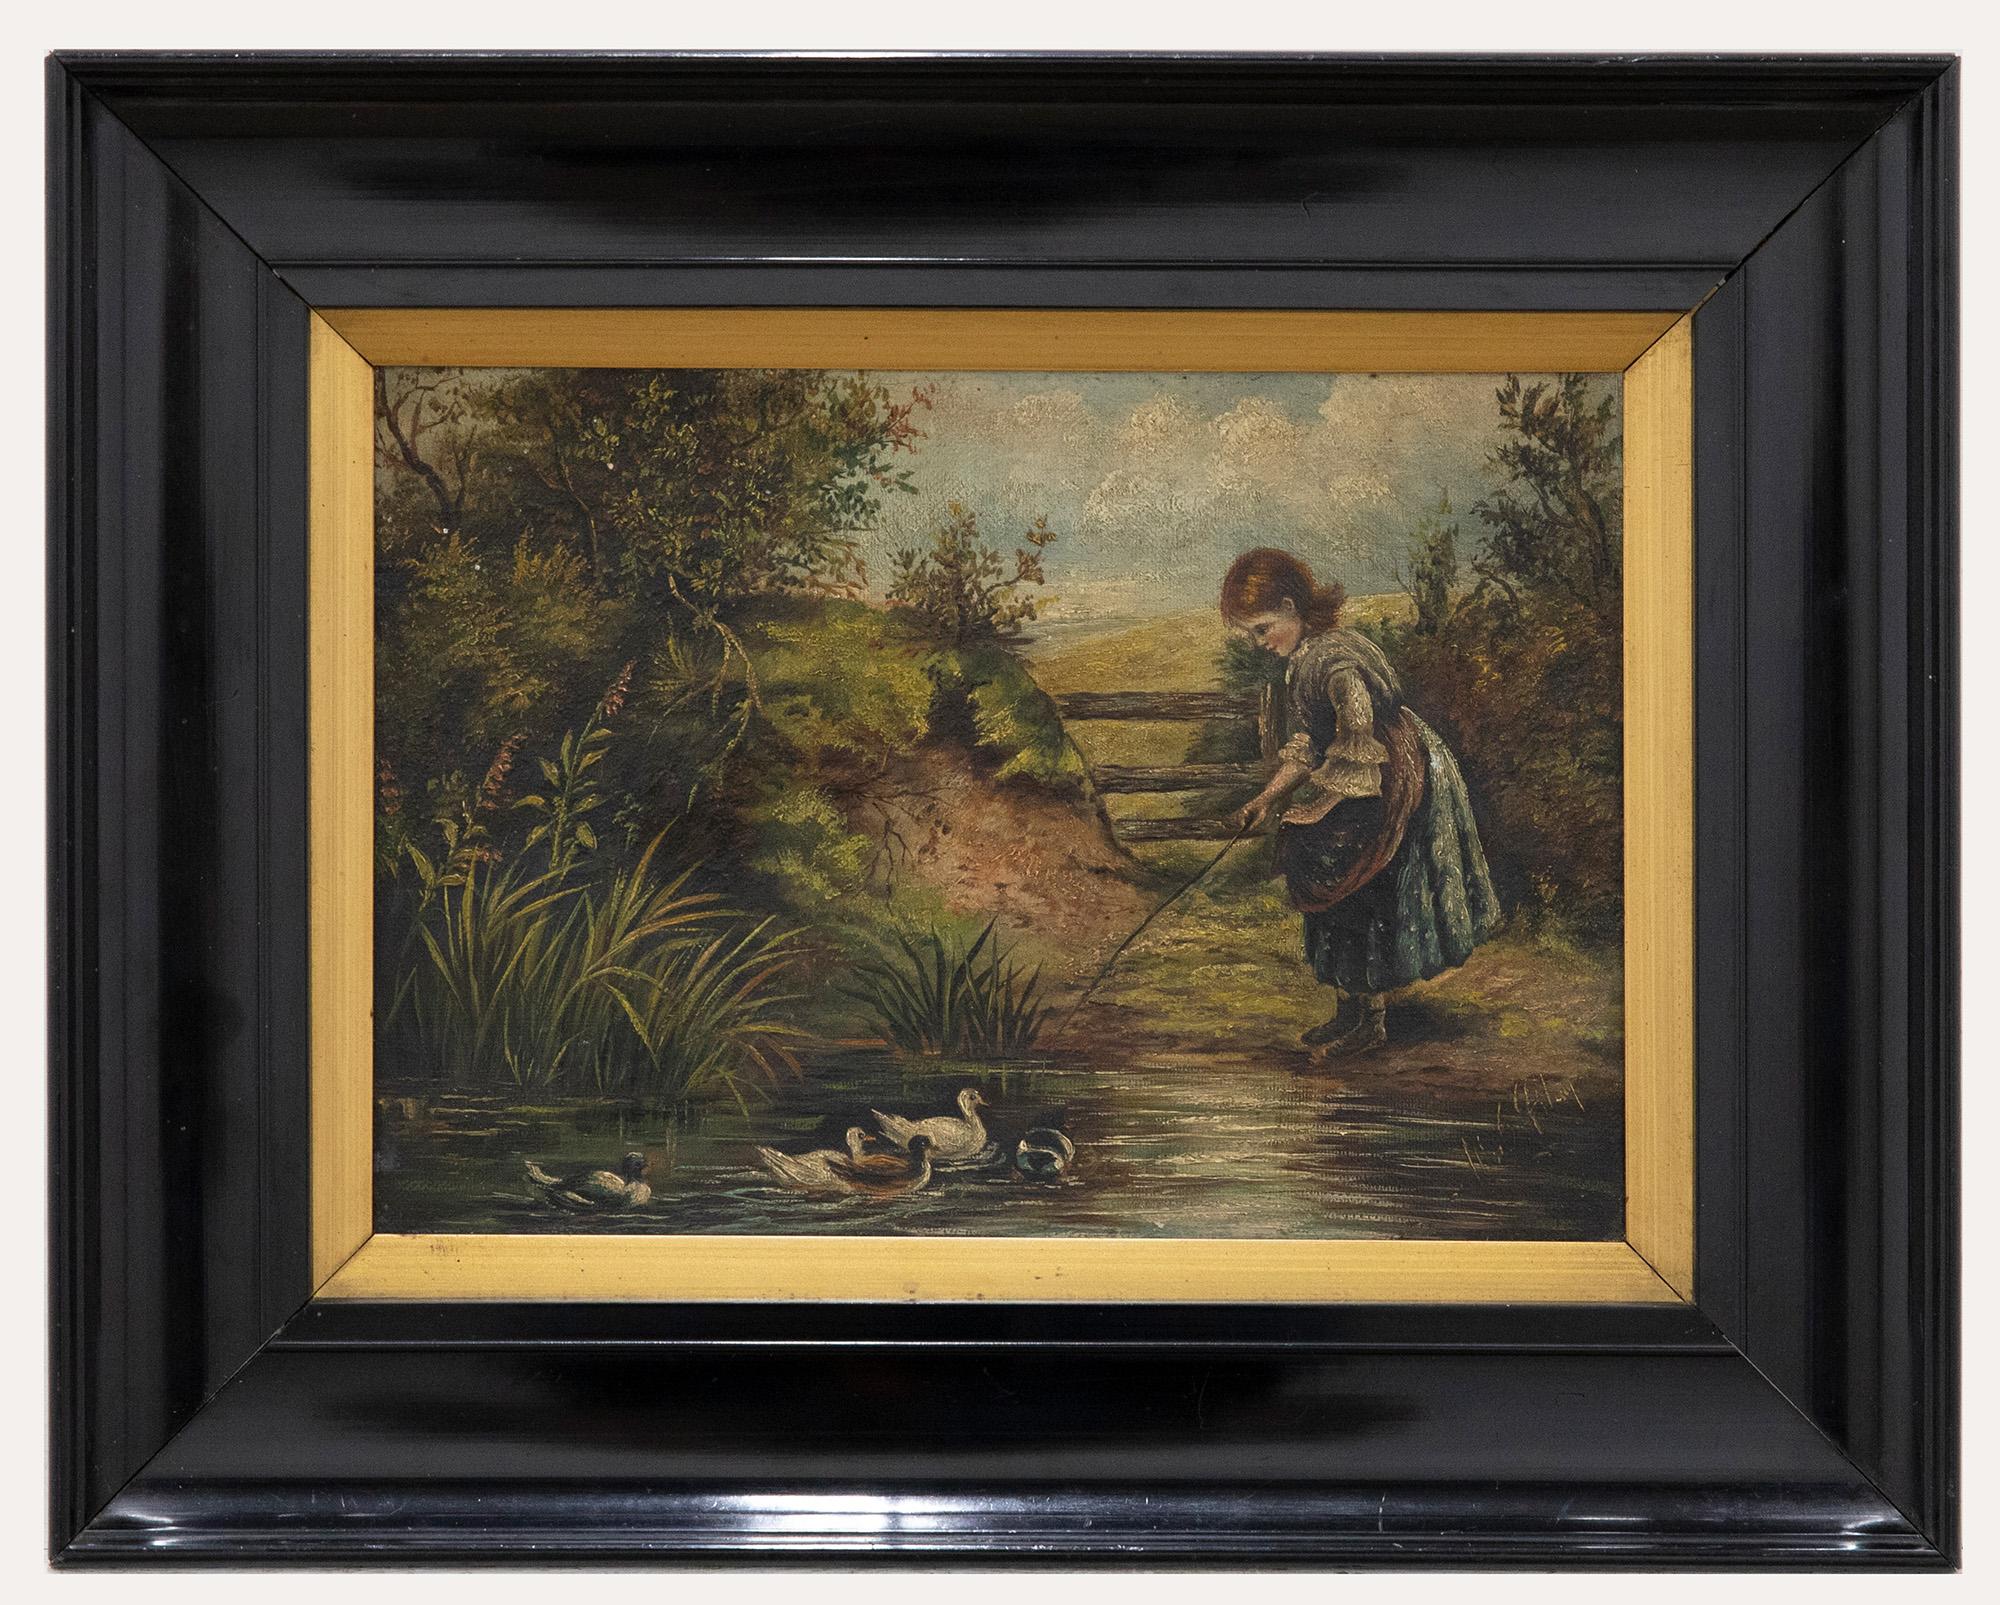 Unknown Figurative Painting - Framed 19th Century Oil - Playing by the Pond